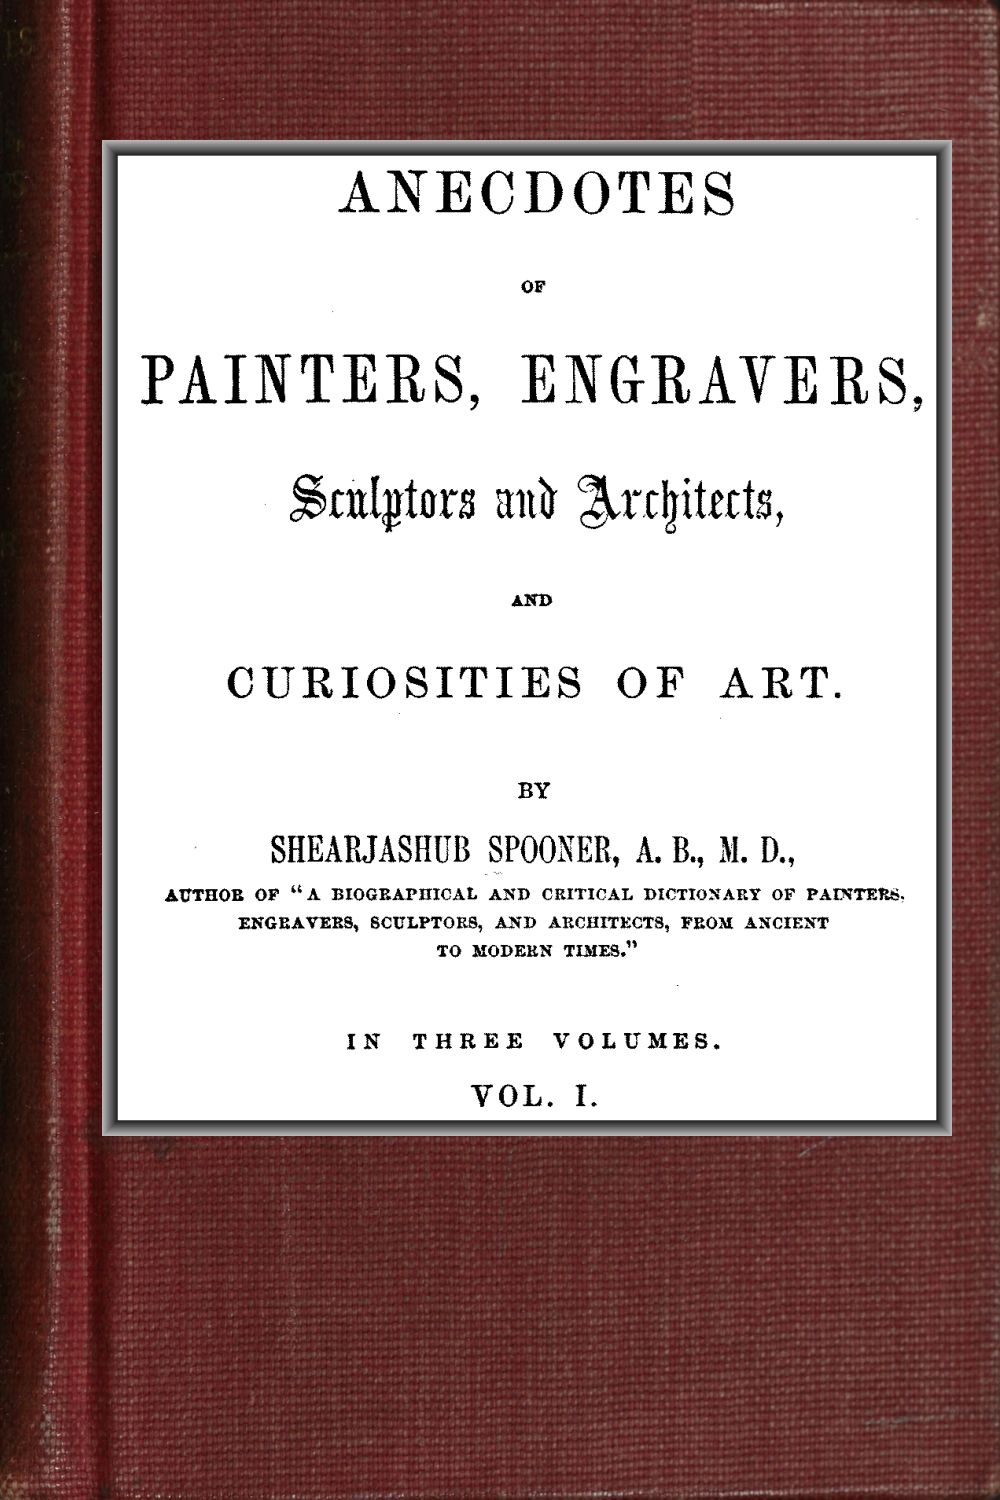 The Project Gutenberg eBook of Anecdotes of Painters, by Shearjashub Spooner. picture pic